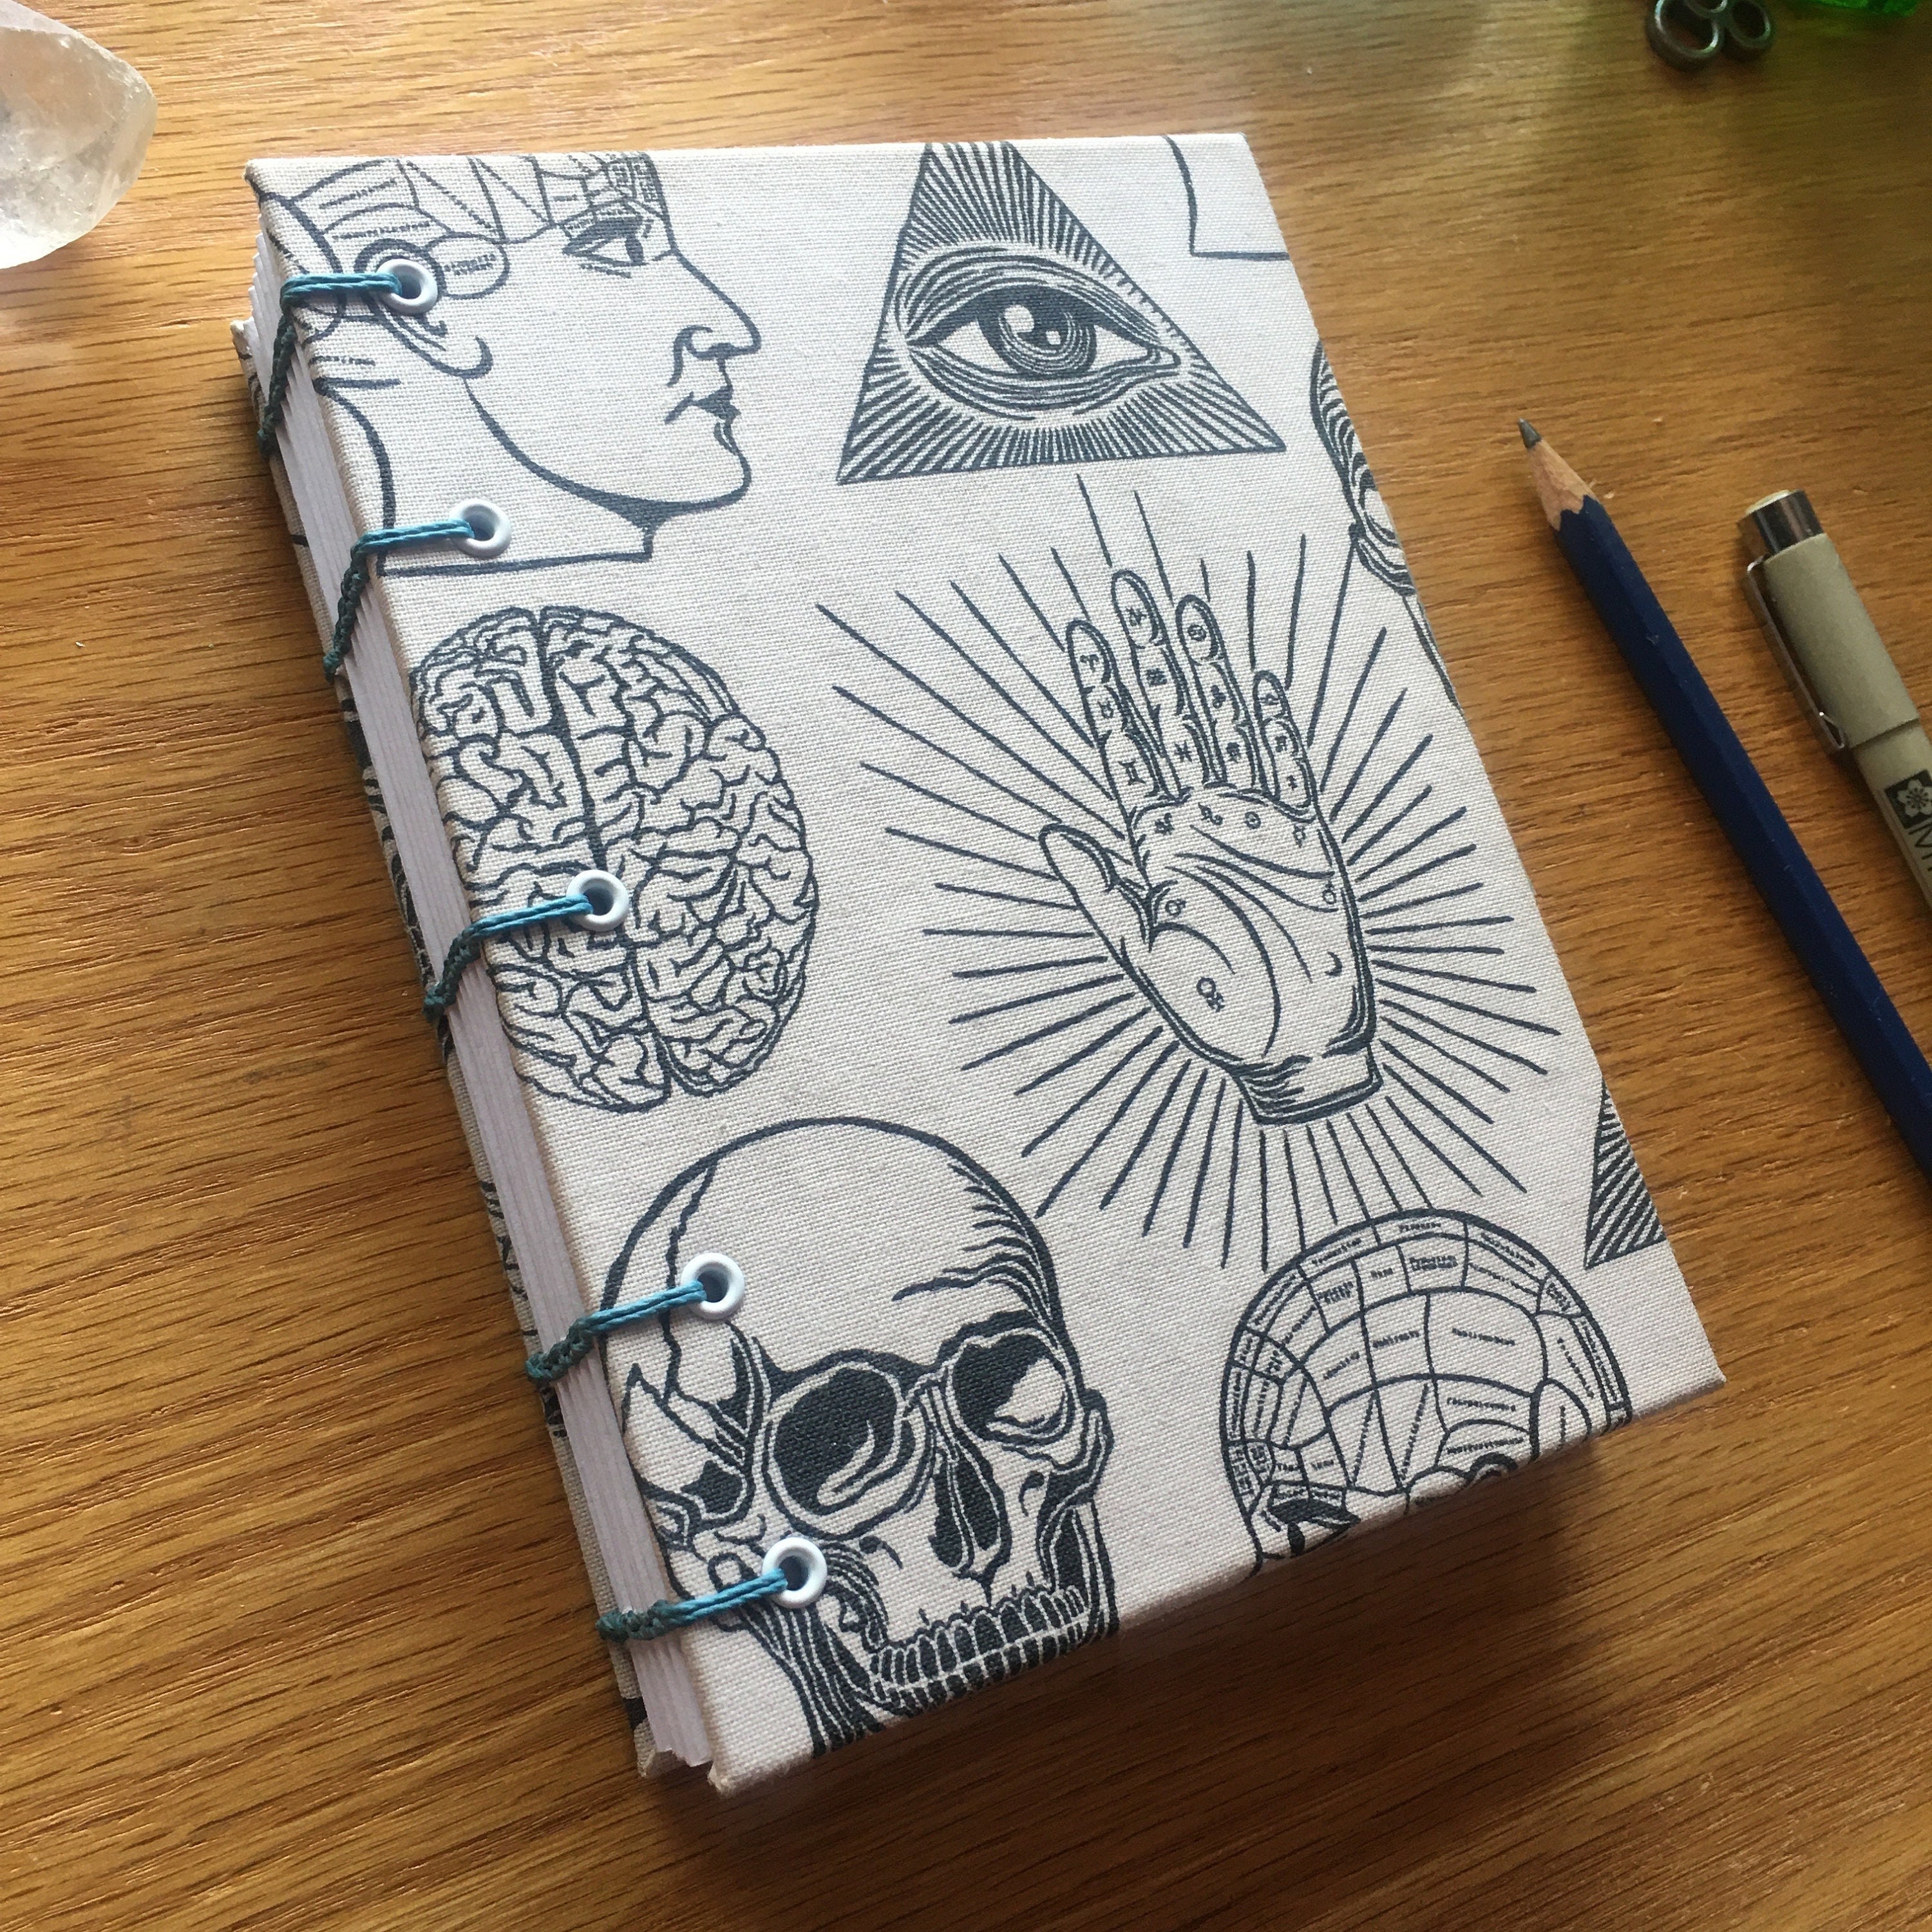 Sketchbook: Aesthetic Patterned Cover| Blank Pages for Drawing, Doodling,  or Sketching